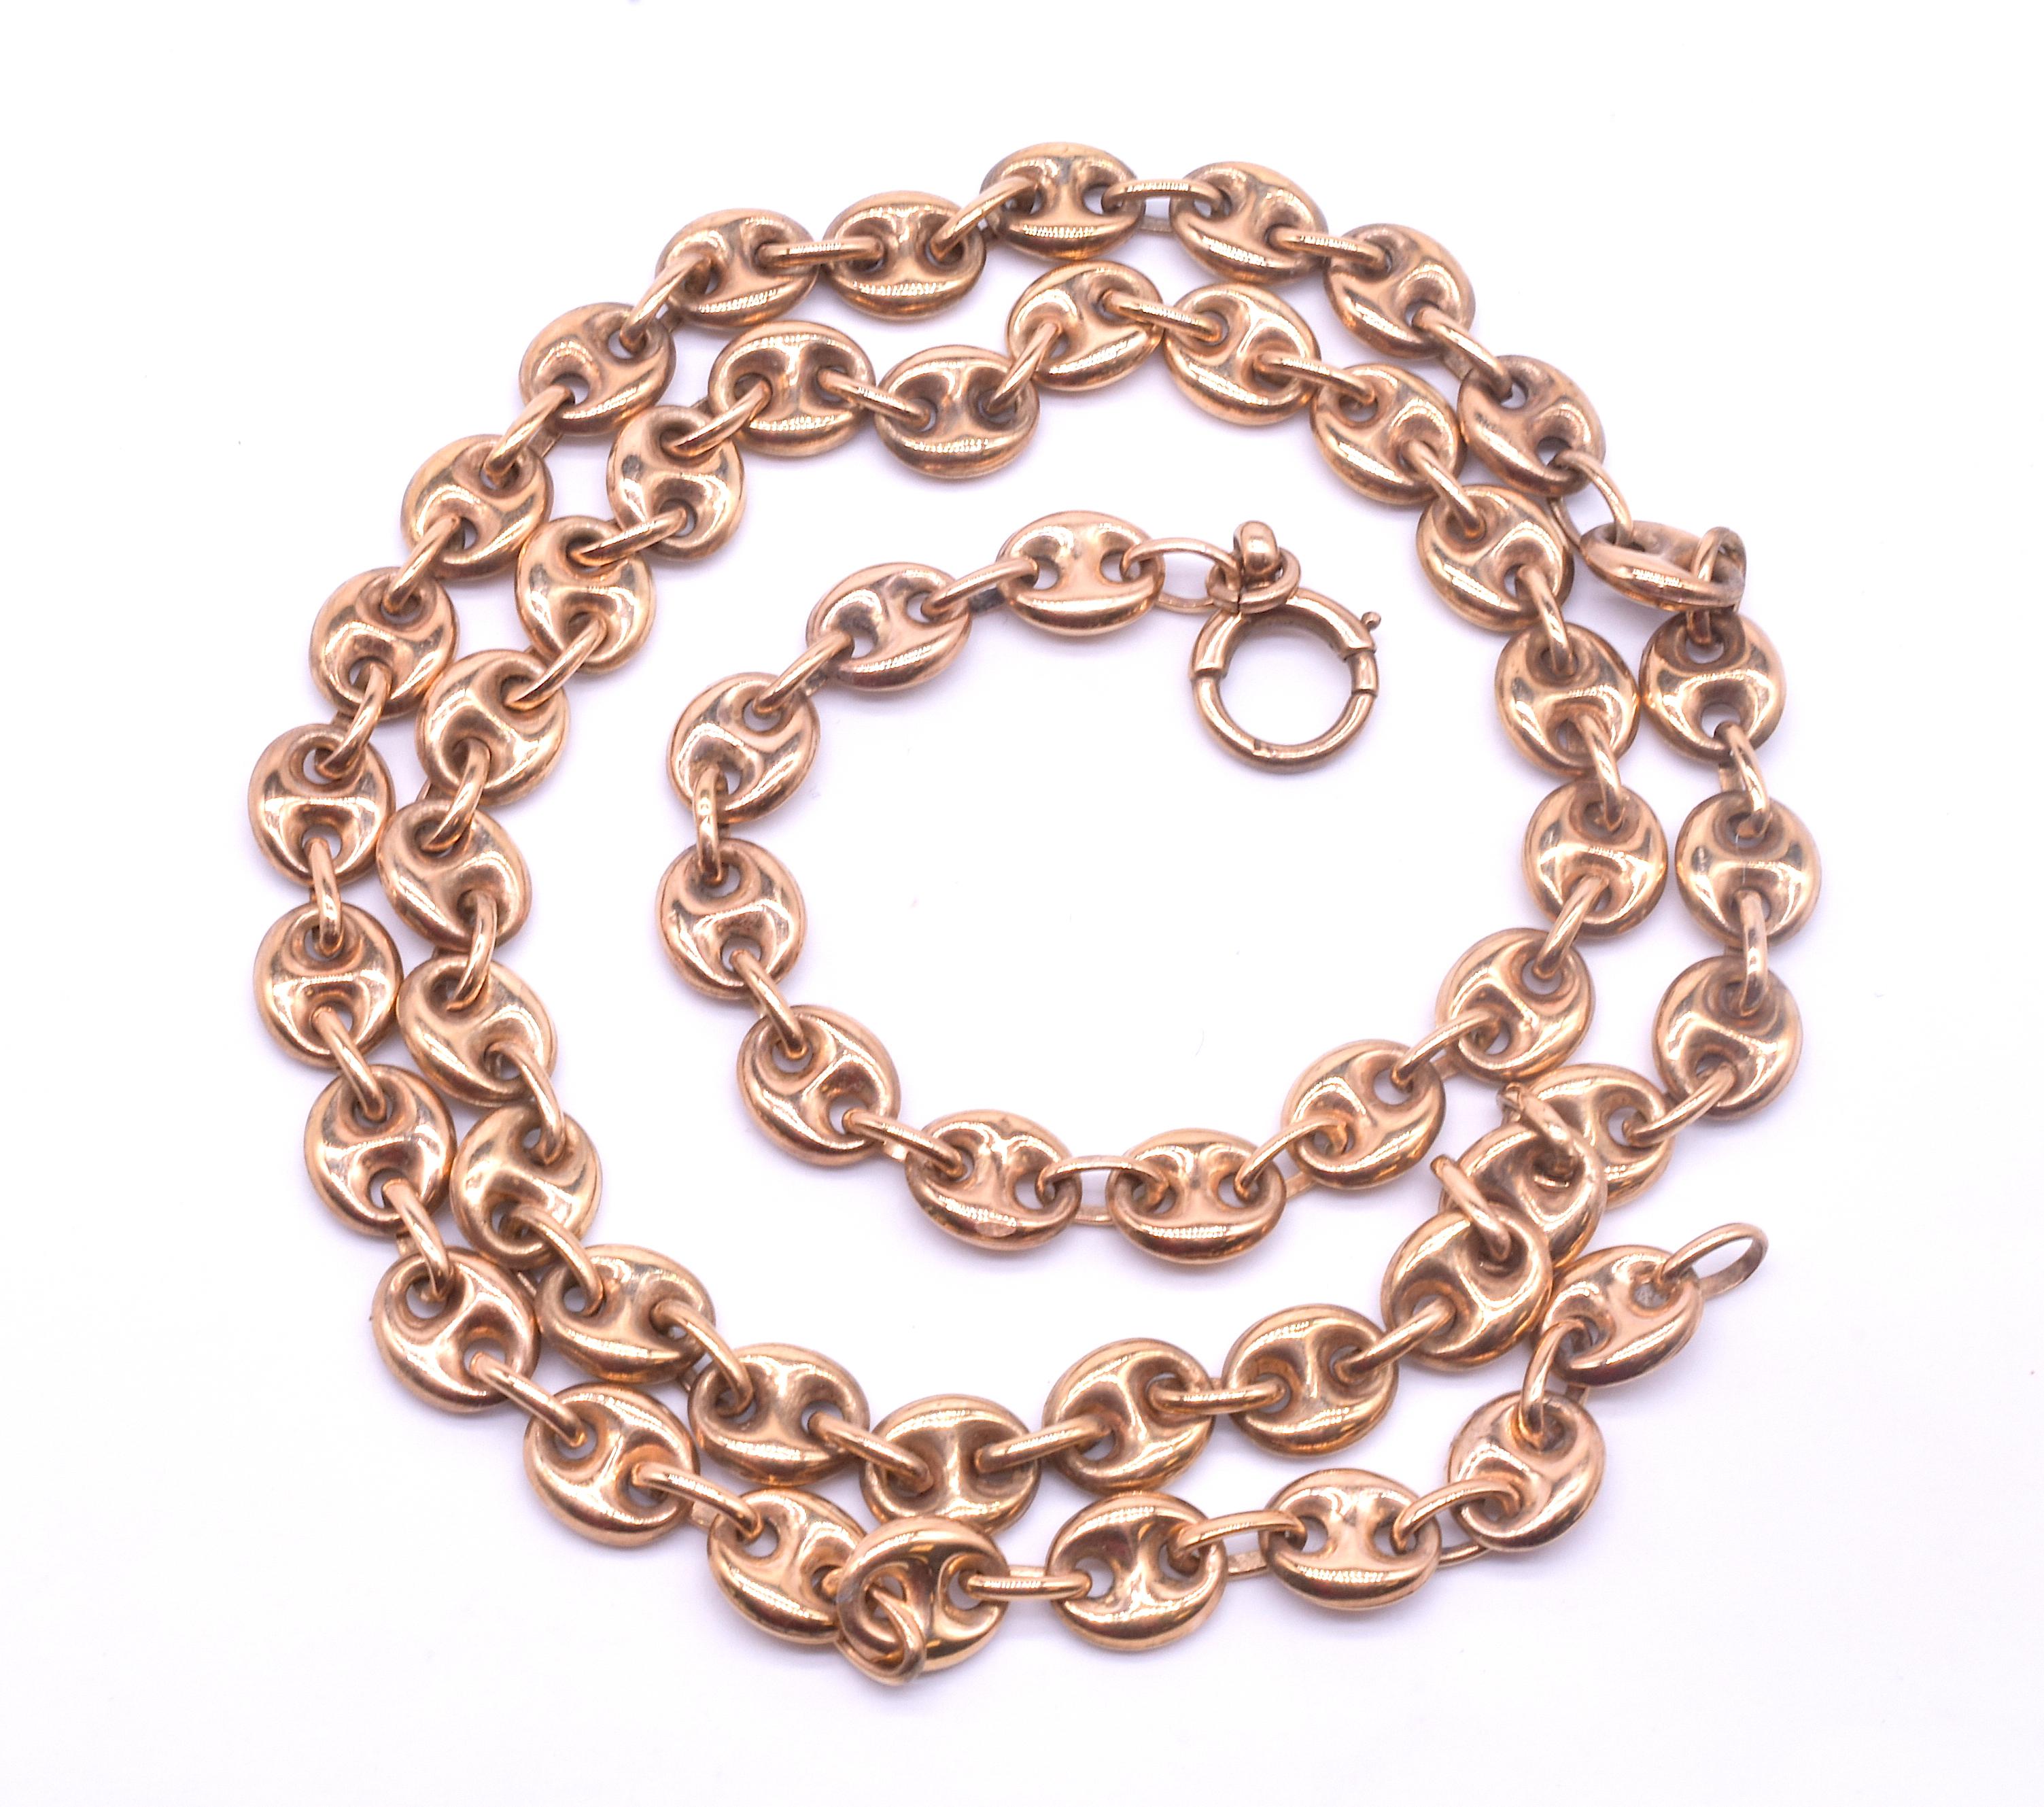 A classic Victorian 9K anchor link chain with nautical anchor links and a large ring from which to hang a pendant. We have attached our own pendant so you can see how well the necklace looks with a pendant as well as alone. The anchor link, with its